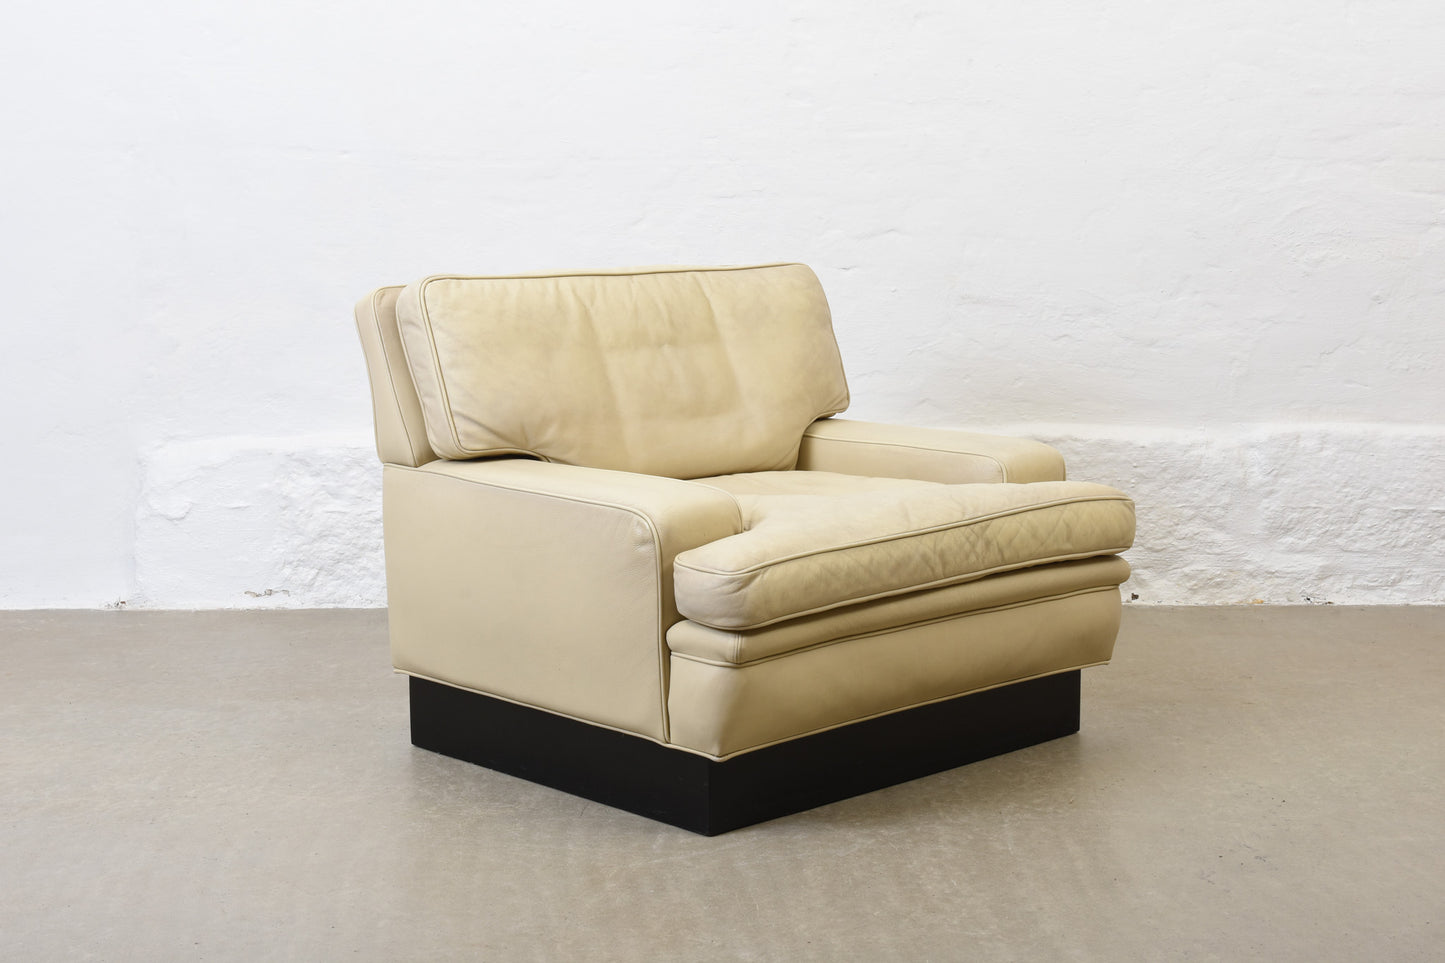 1960s 'Mexico' lounger by Arne Norell